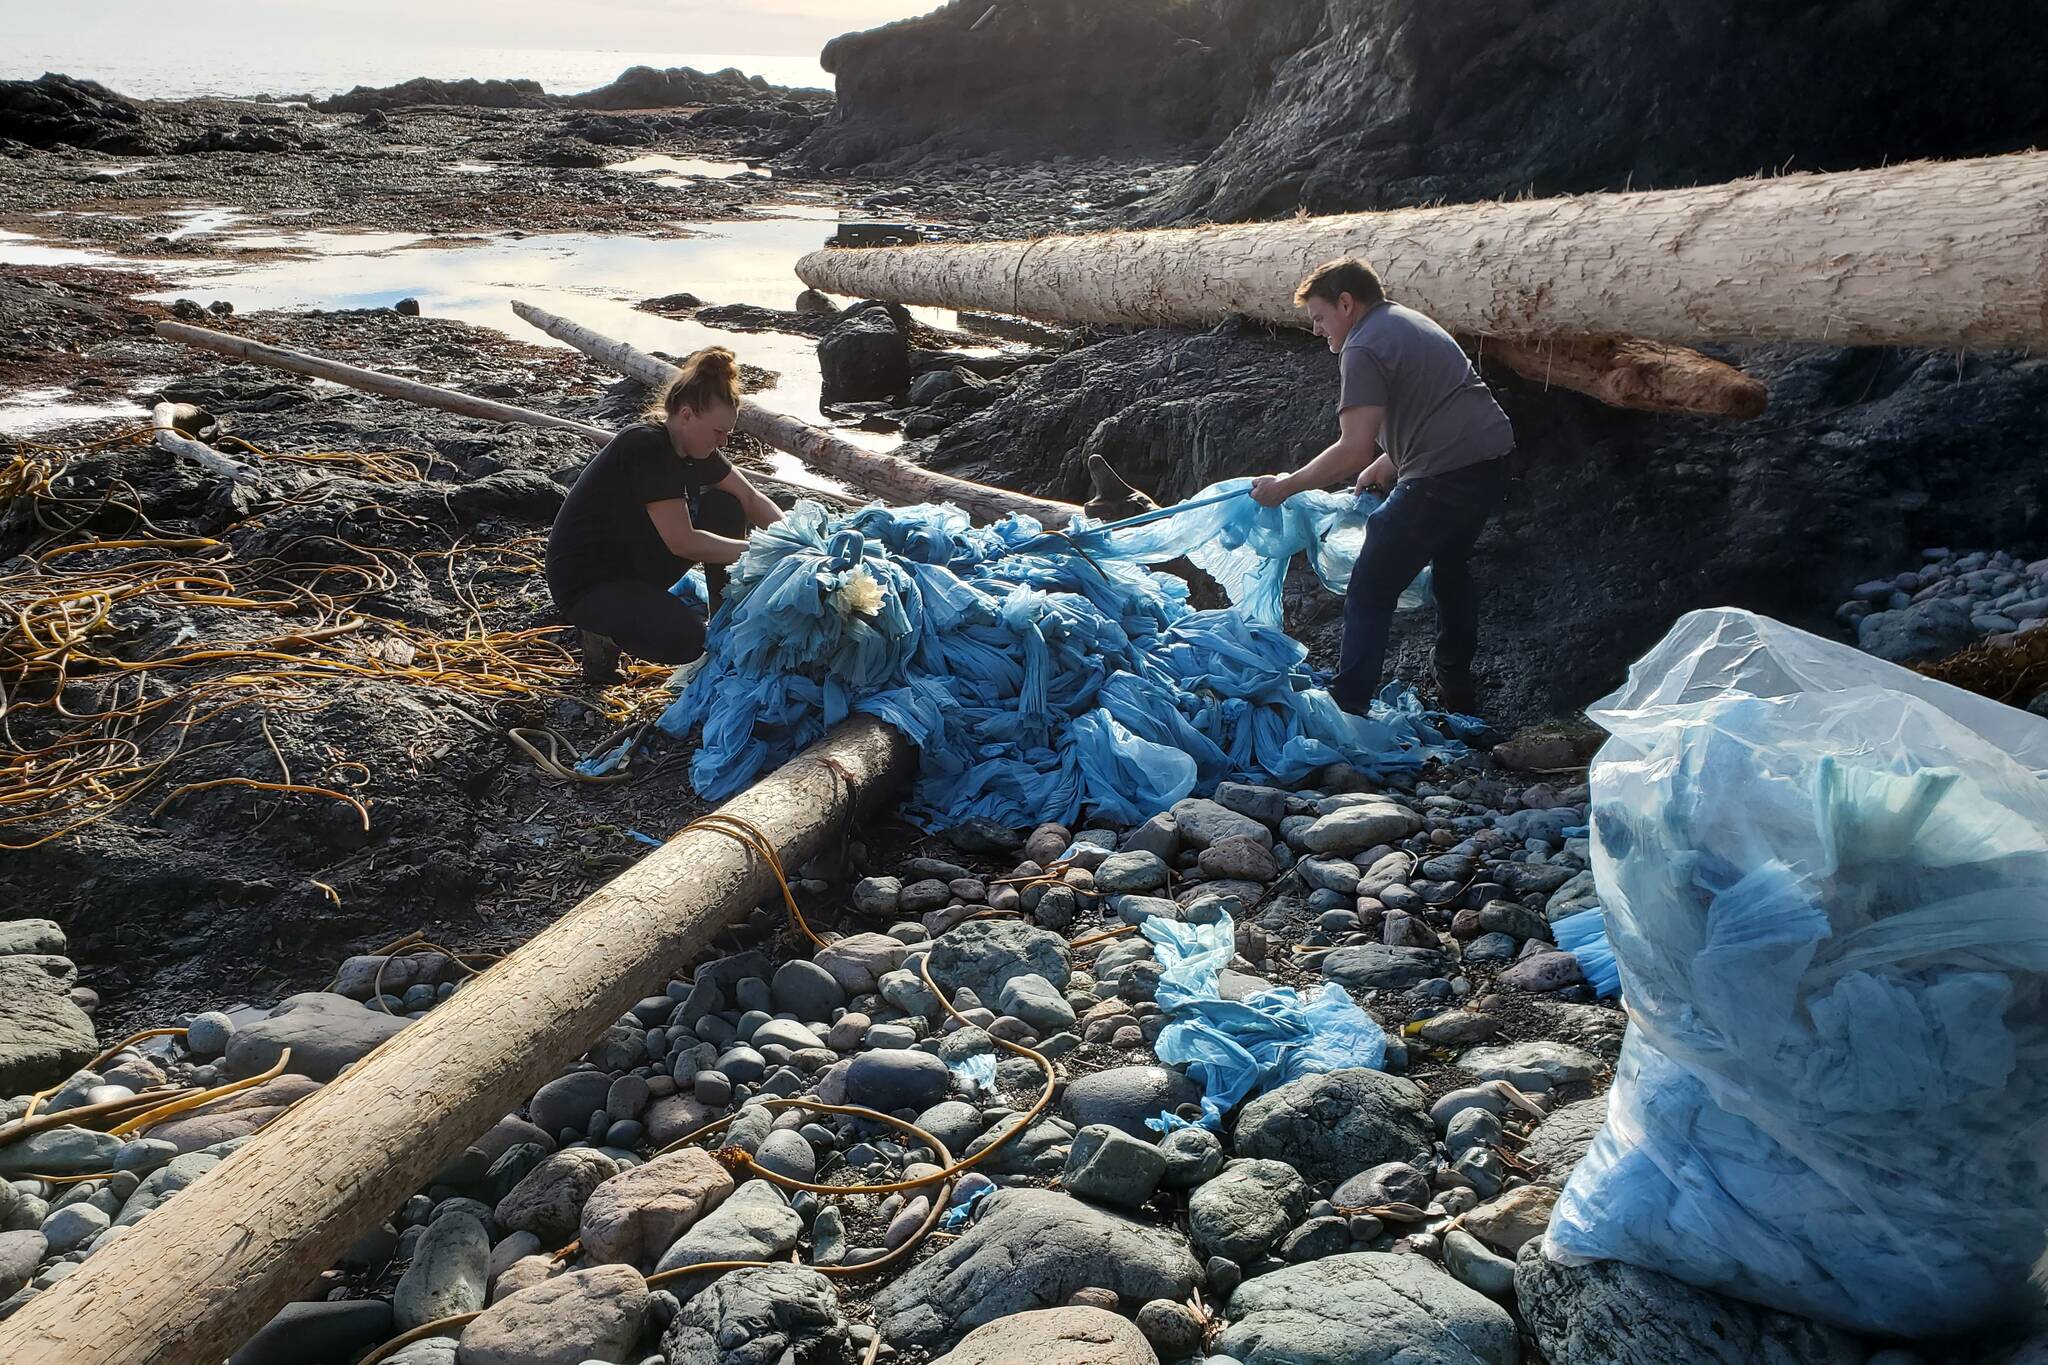 Debris believed to be from the 2021 Zim Kingston freighter spill is shown being collected off Palmerston Beach, on Vancouver Island B.C. in this handout image provided by the by the environmental organization Epic Exeo from February 2022. Those who walk the beaches say debris from the 109 shipping containers that went overboard is still washing up onshore. THE CANADIAN PRESS/HO-Epic Exeo **MANDATORY CREDIT**